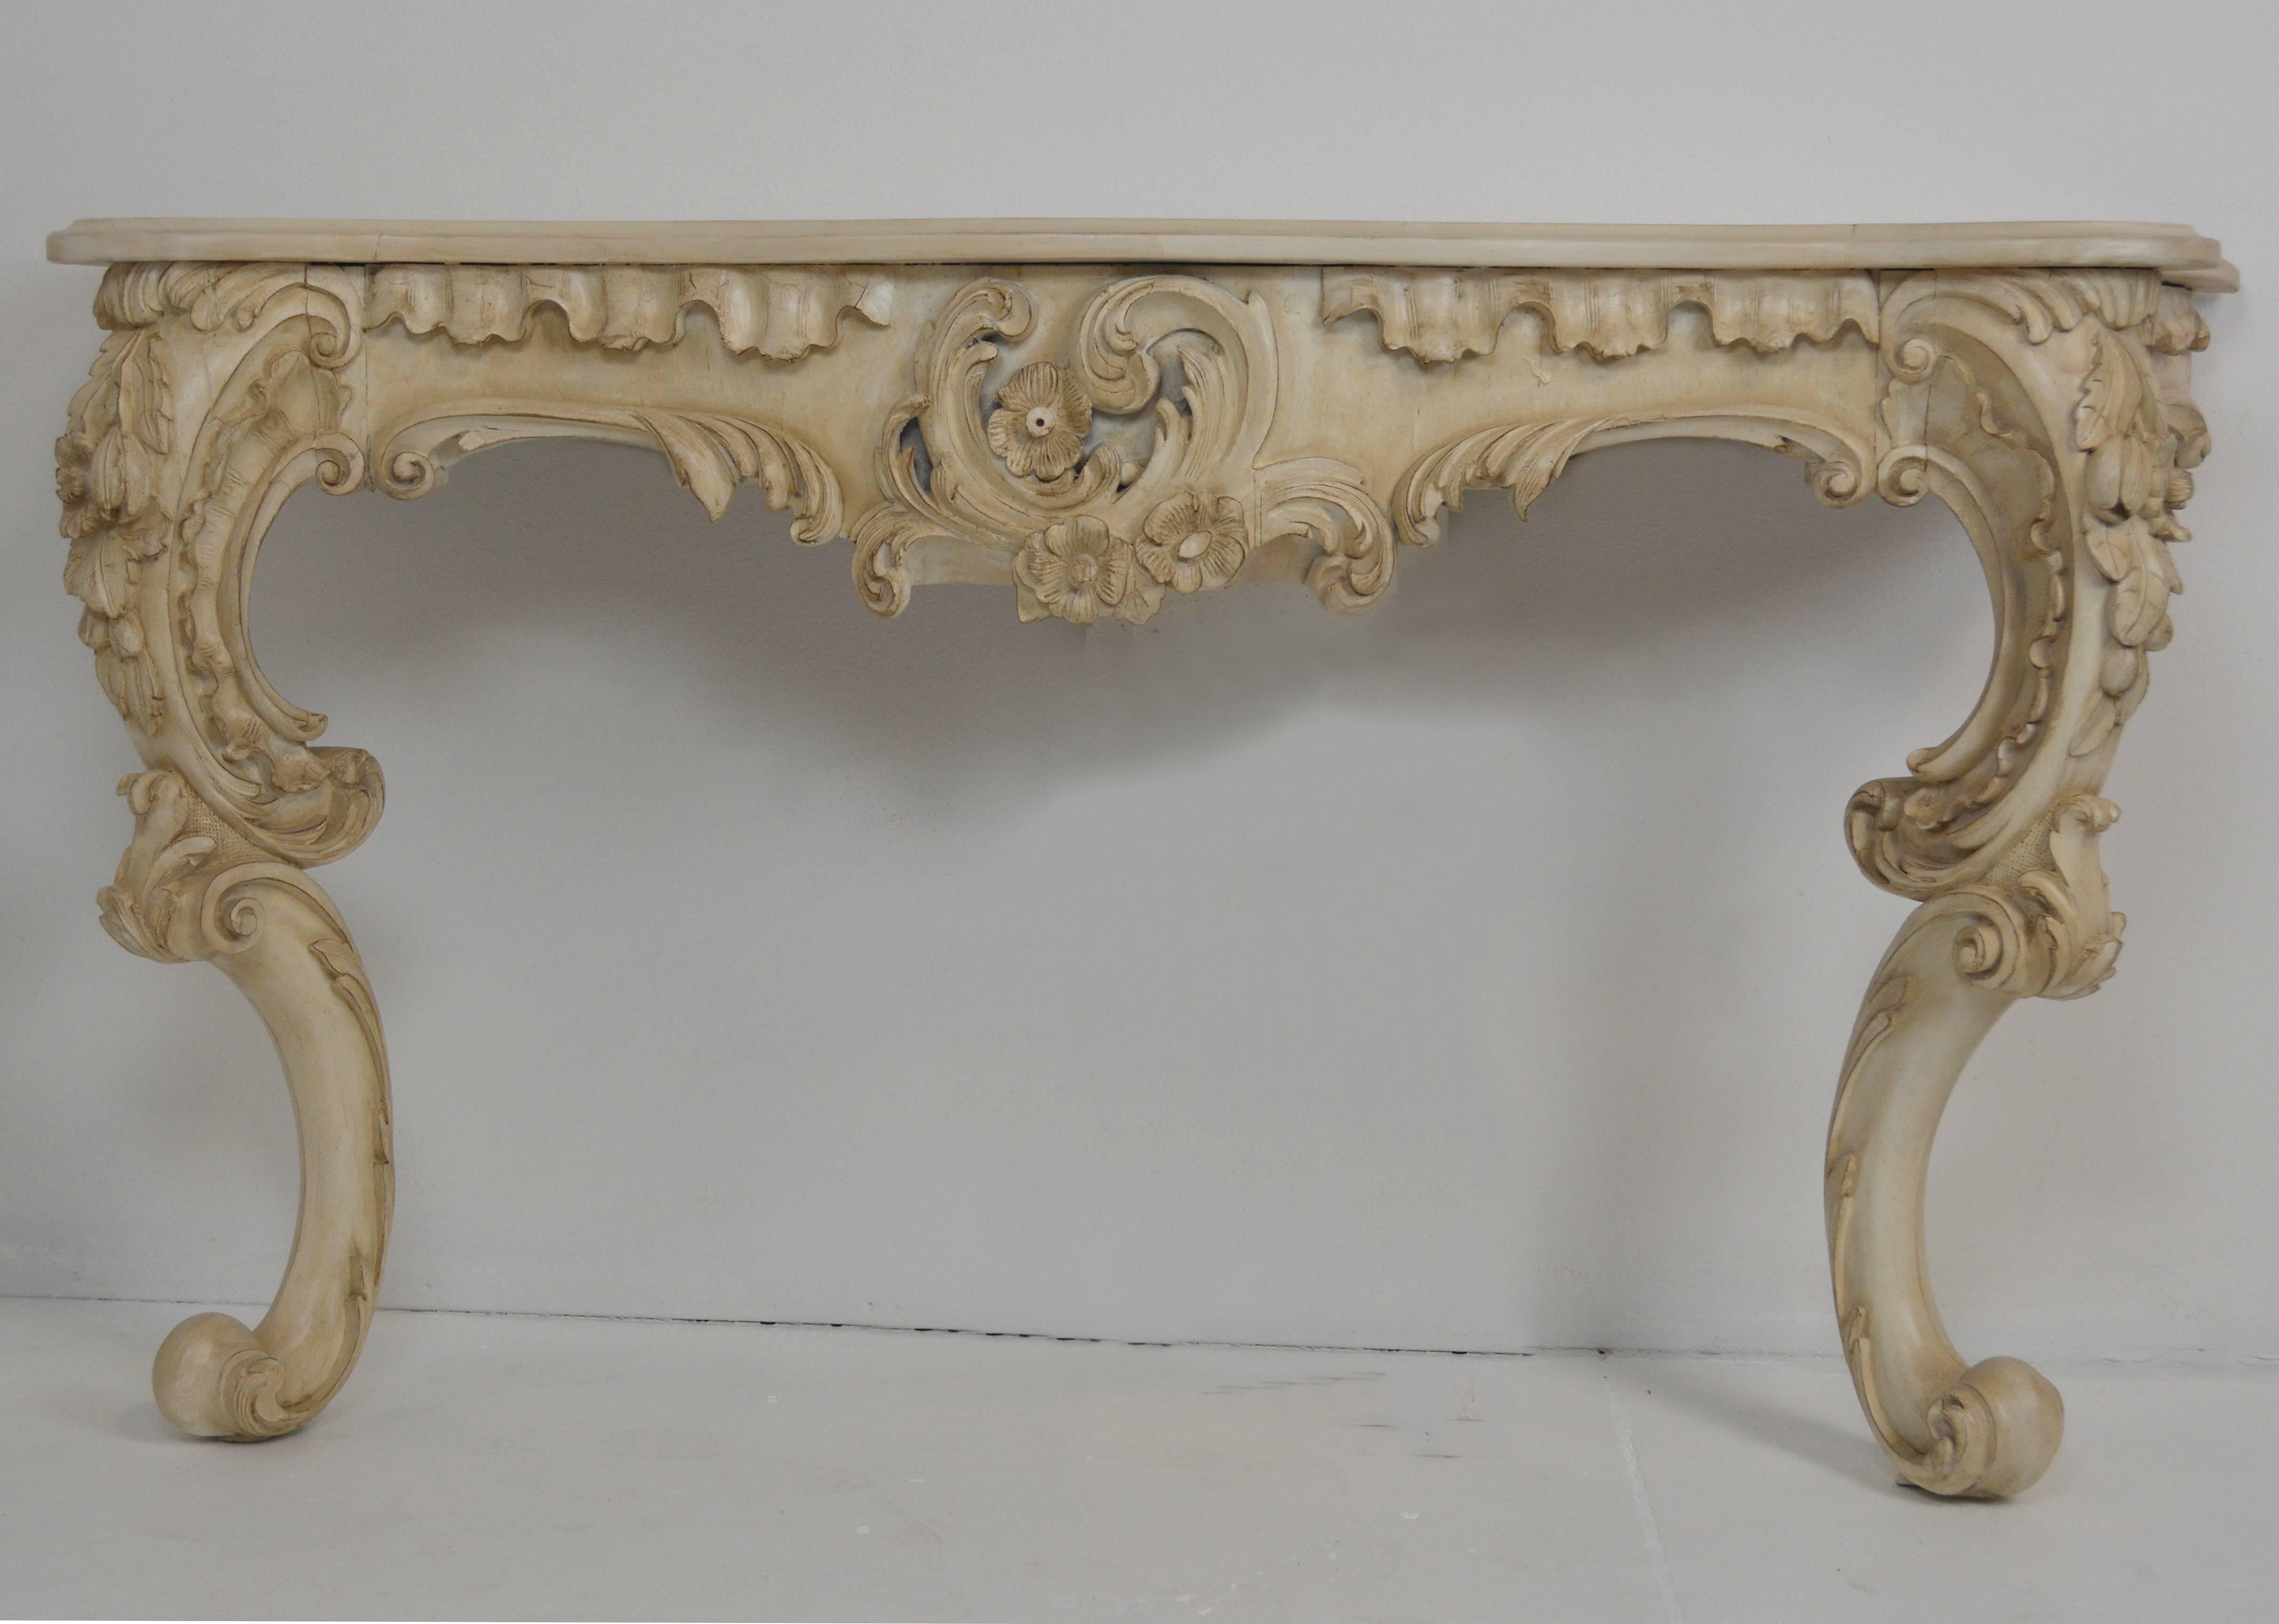 A good quality Rococo style console, with carved cabriole legs and apron and a shaped top.